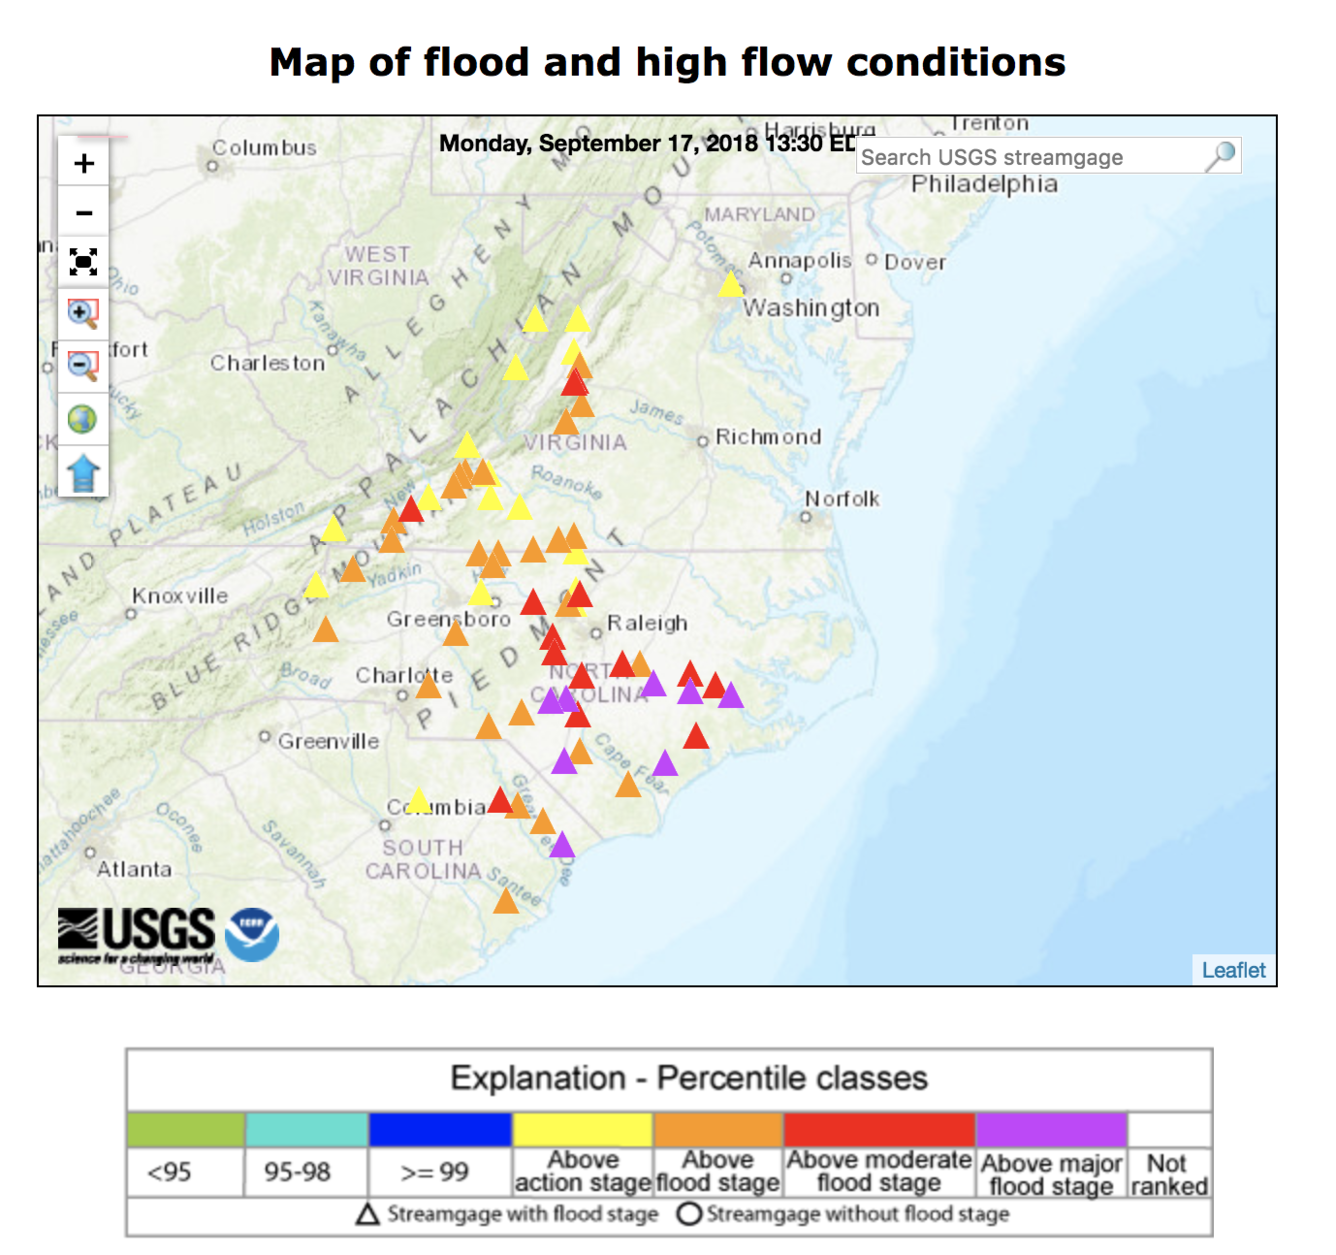 Image shows a screenshot of the USGS WaterWatch Webmap of High and Low Flow Conditions in the Carolinas